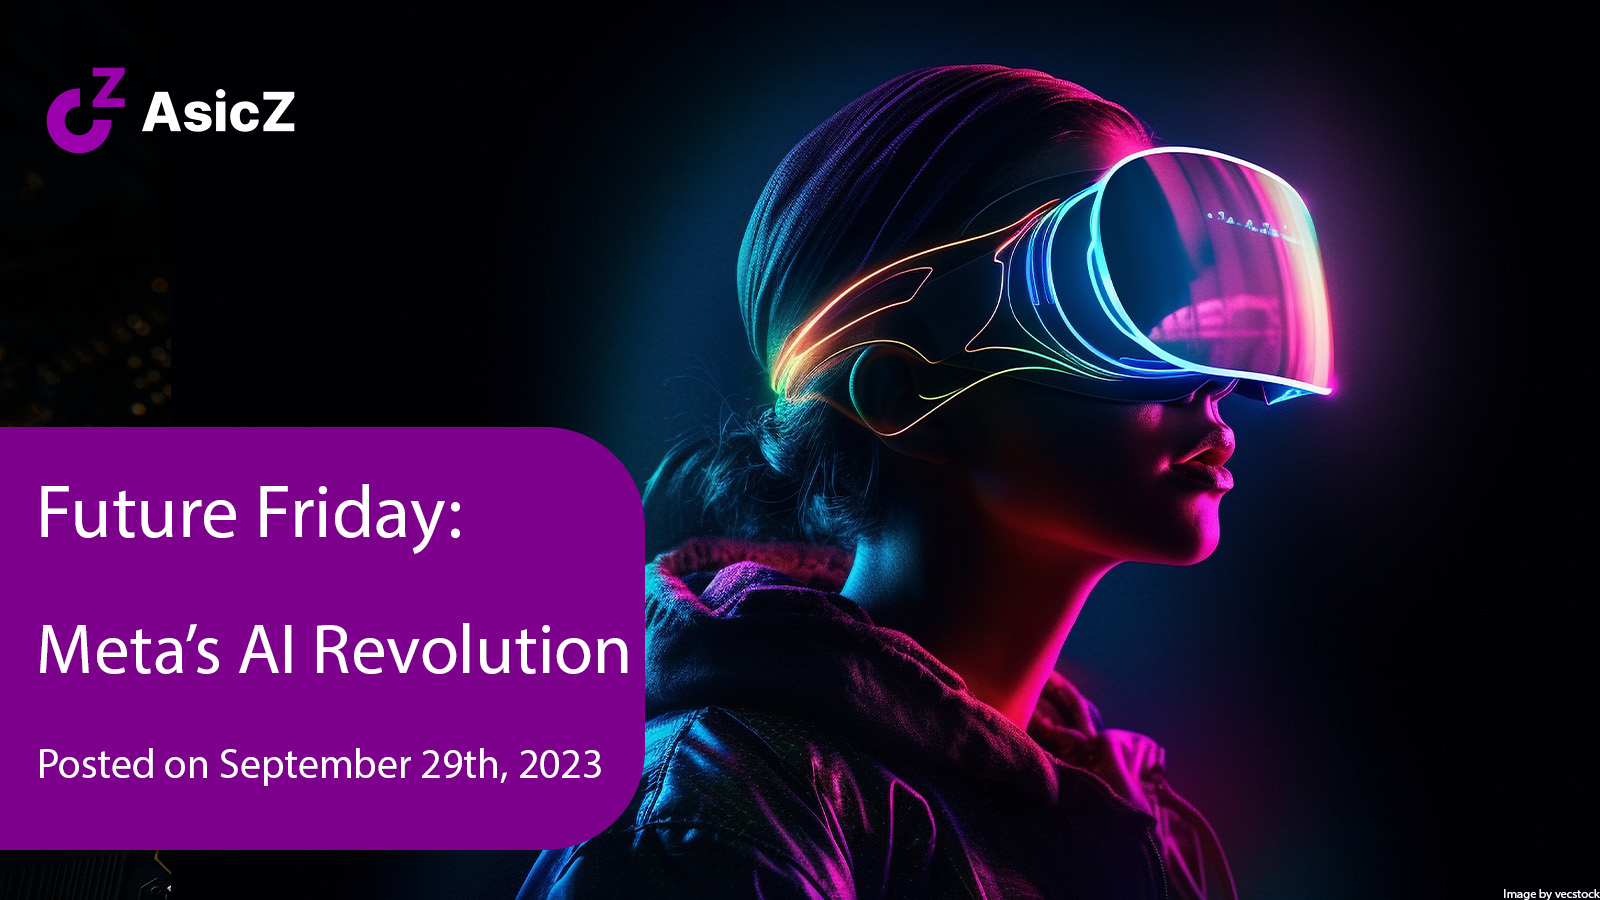 Future Friday: Meta’s AI Revolution – A New Era of Interaction and Engagement